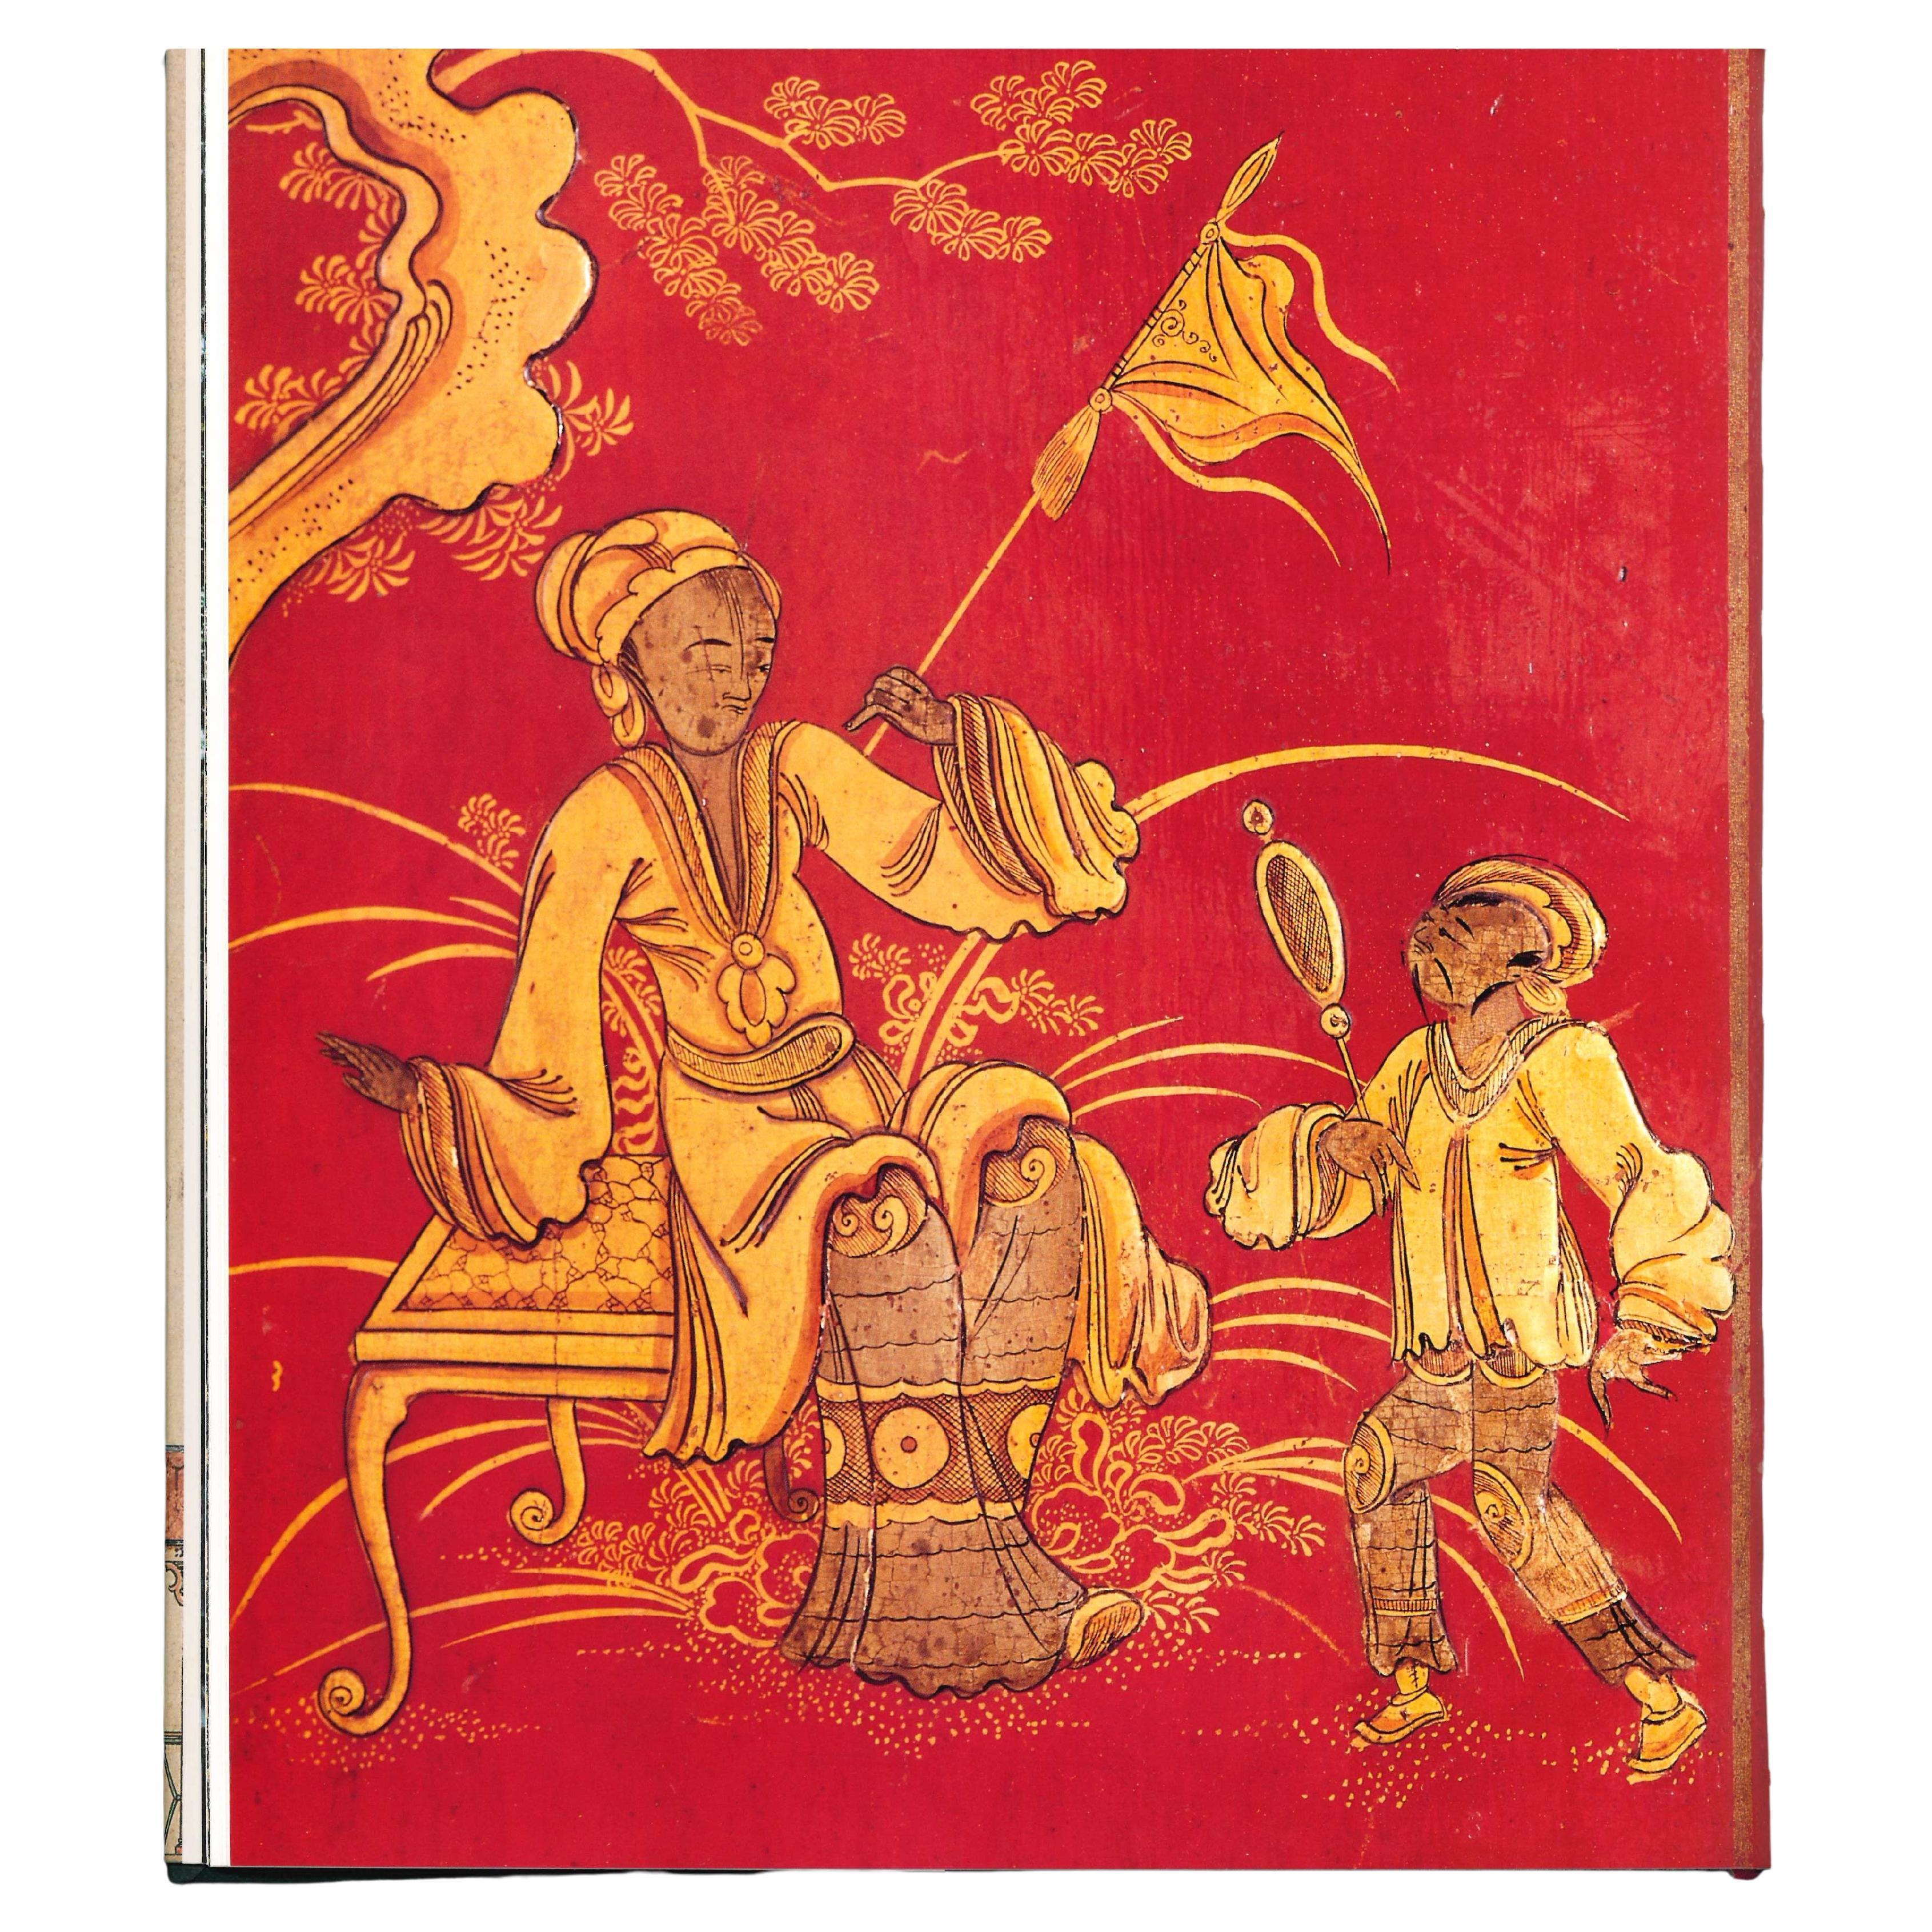 A hardback book with original dust jacket. Chinoiserie is one of the strongest, mostt consistent strains in western taste. It has affected every area of decor and design from Chippendale furniture to the architecture and the likes of Drotningholm